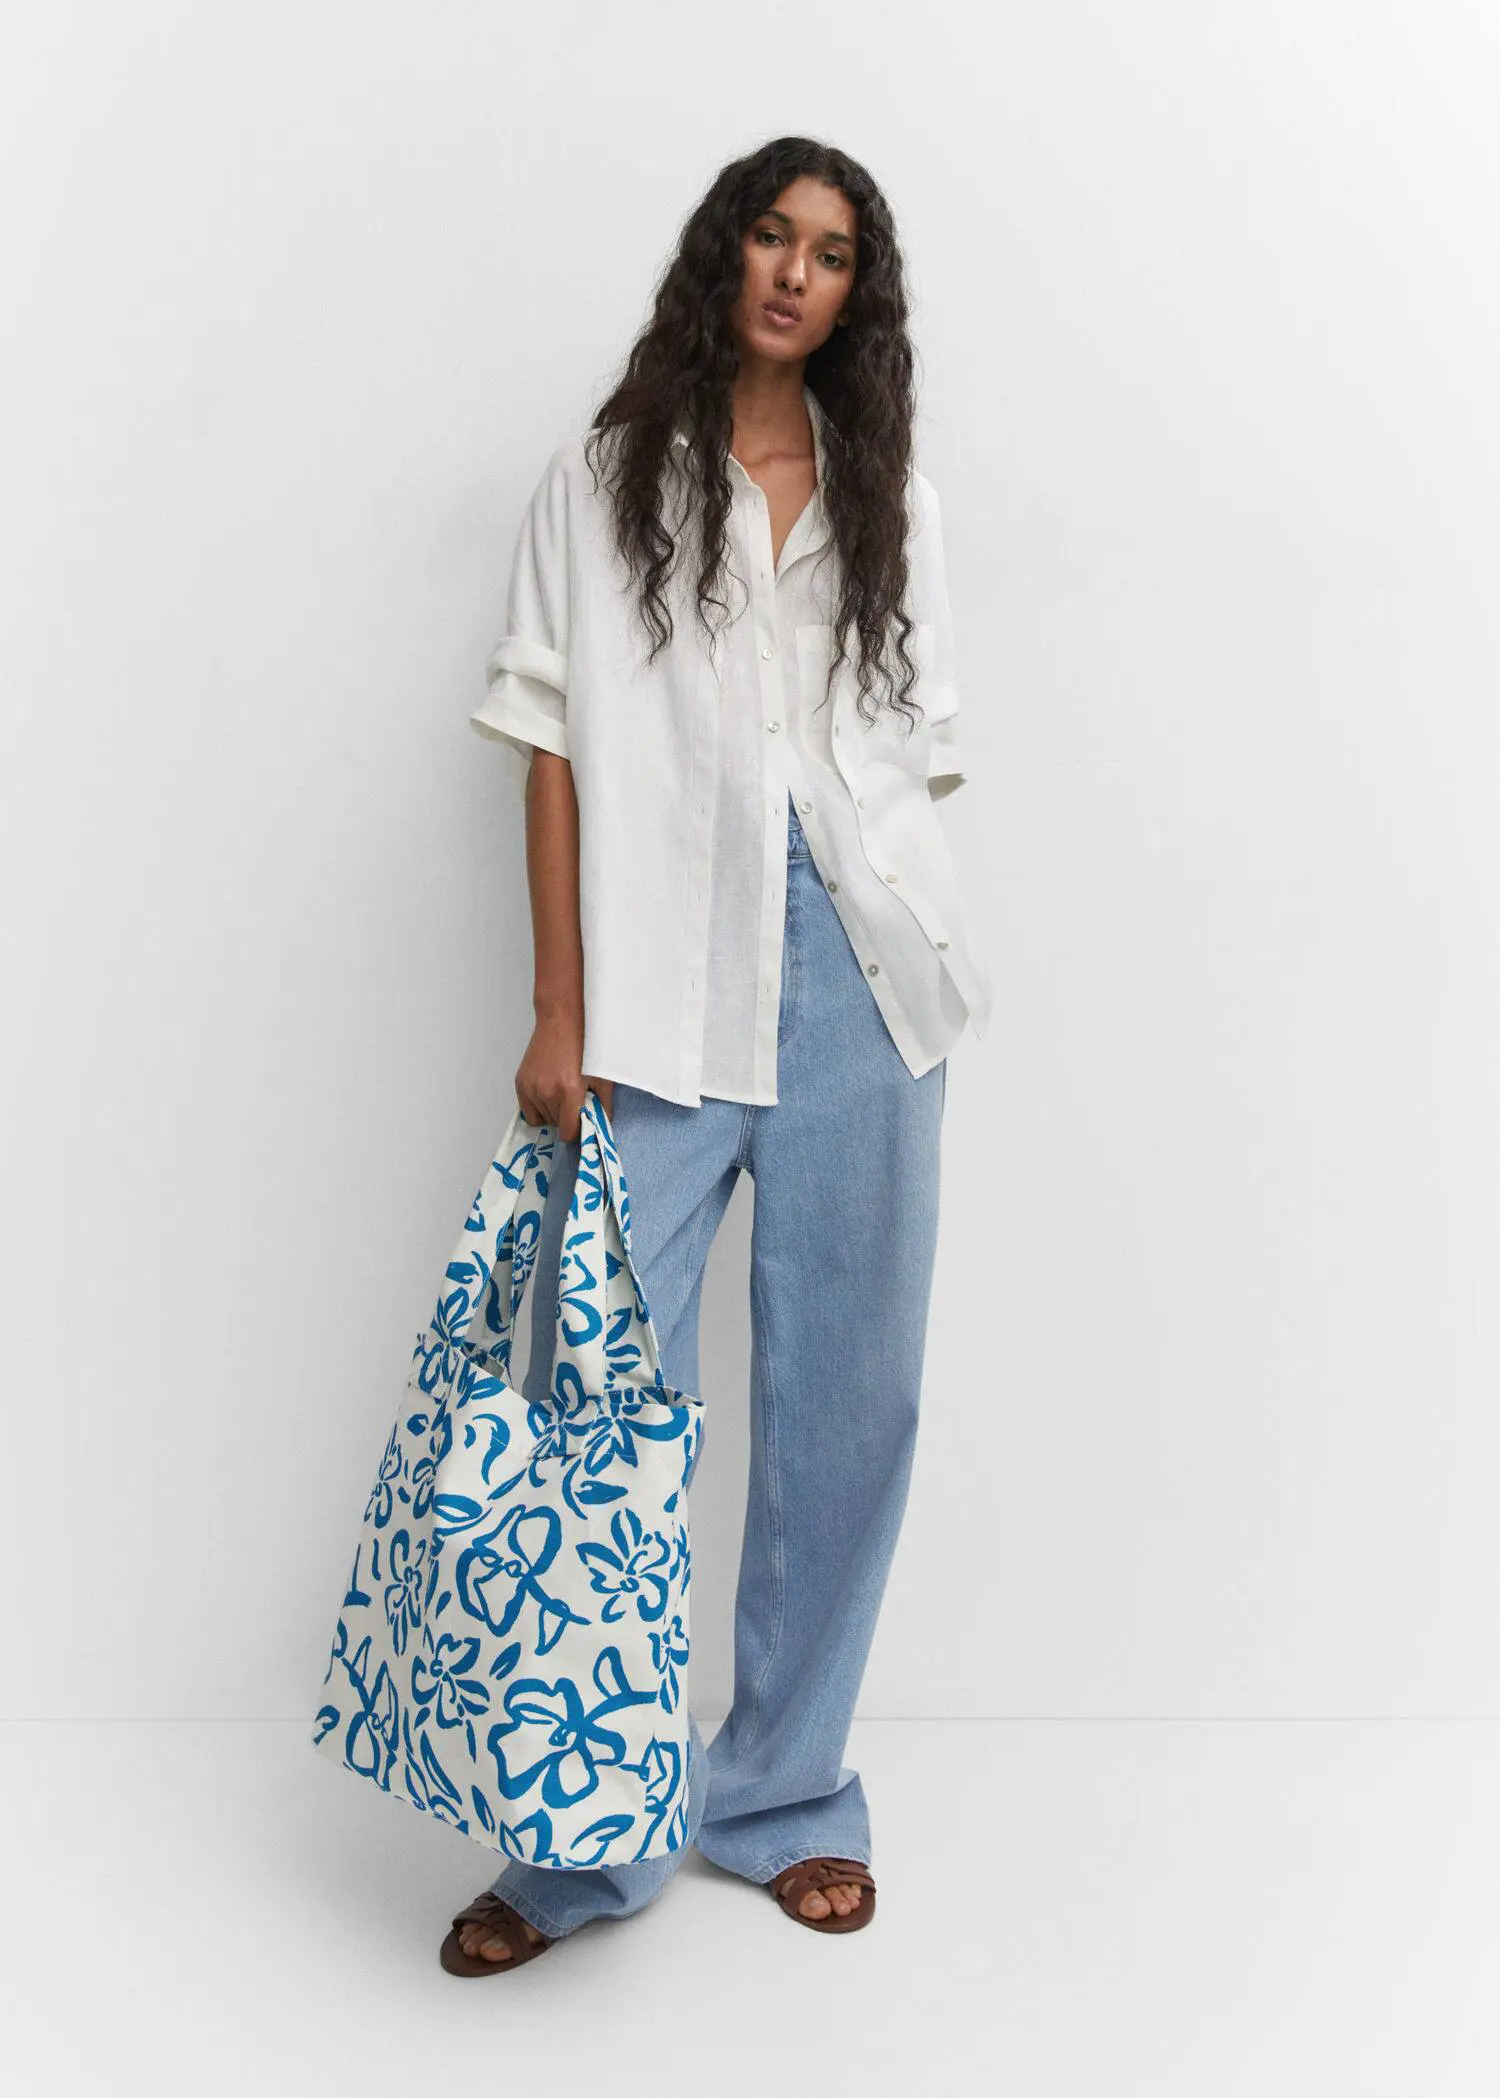 Mango Floral tote bag. a woman holding a bag while standing next to a wall. 